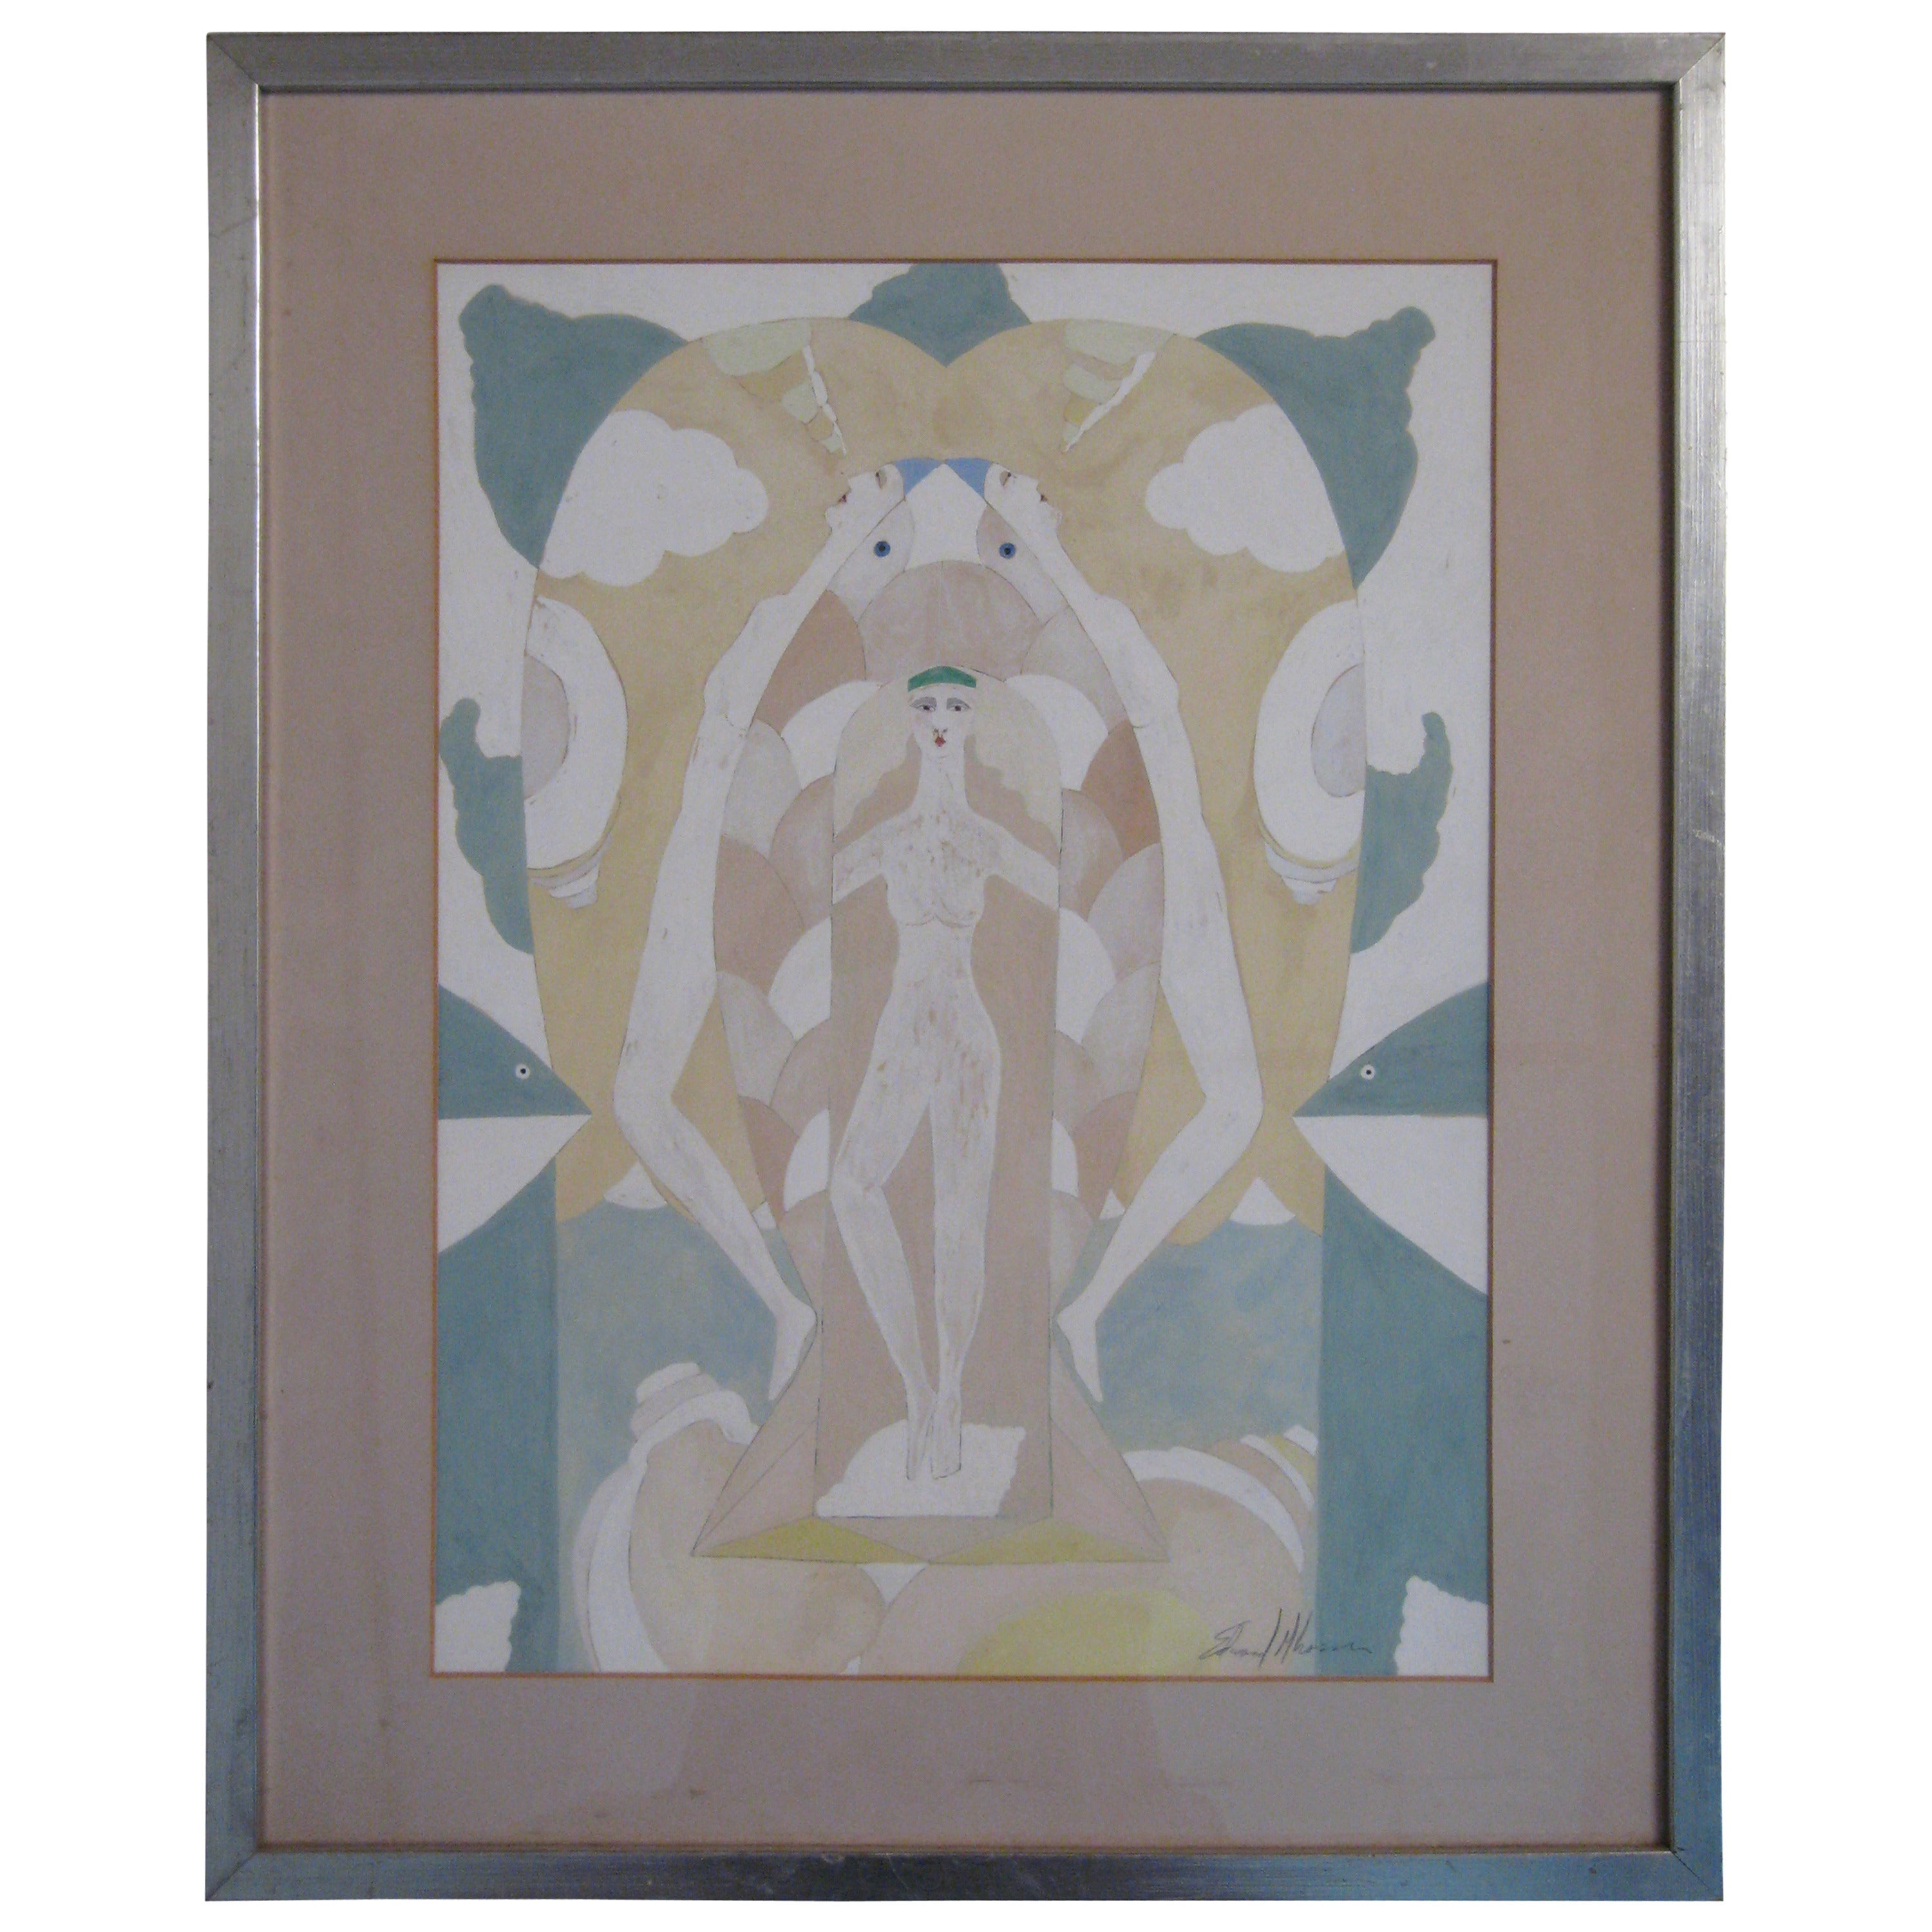 Signed Art Deco Gouache of Sea Nymphs